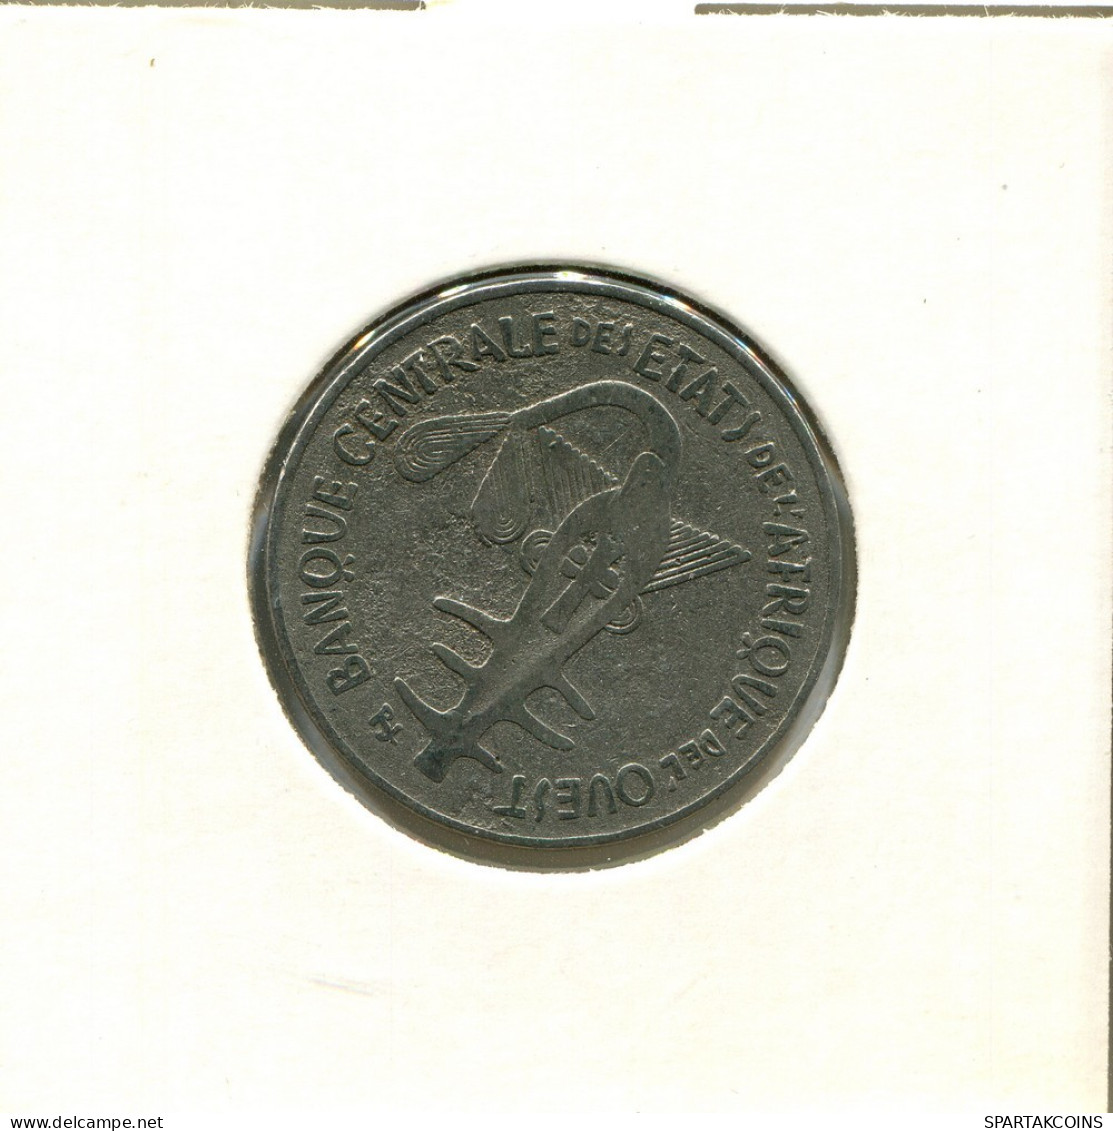 100 FRANCS CFA 1981 Western African States (BCEAO) Coin #AT054.U.A - Other - Africa